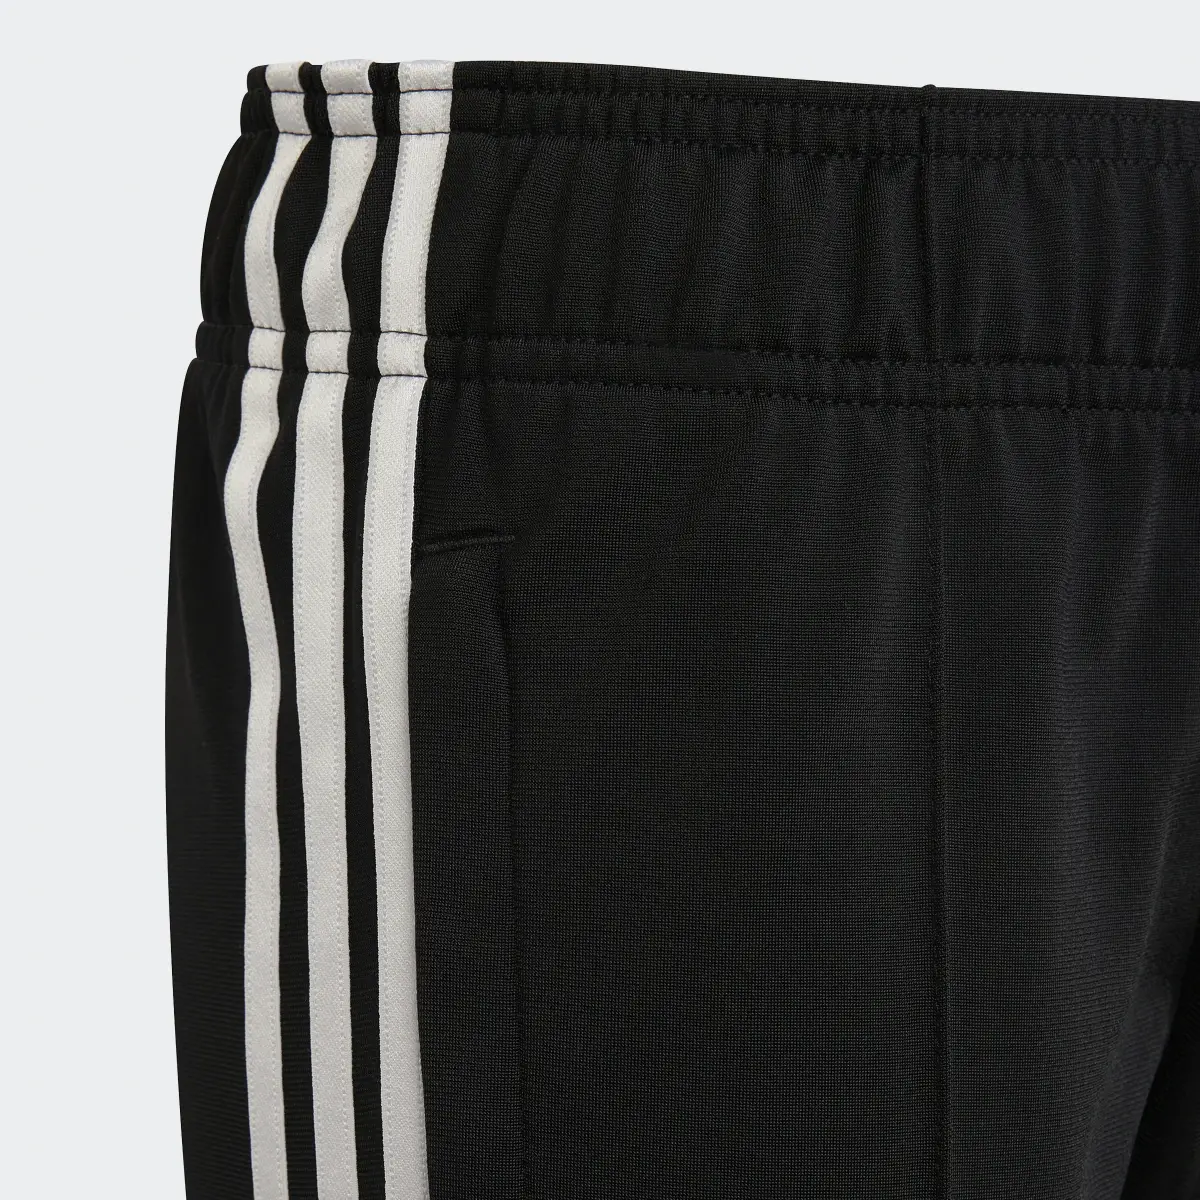 Adidas 3-Stripes Flared Tracksuit Bottoms. 3